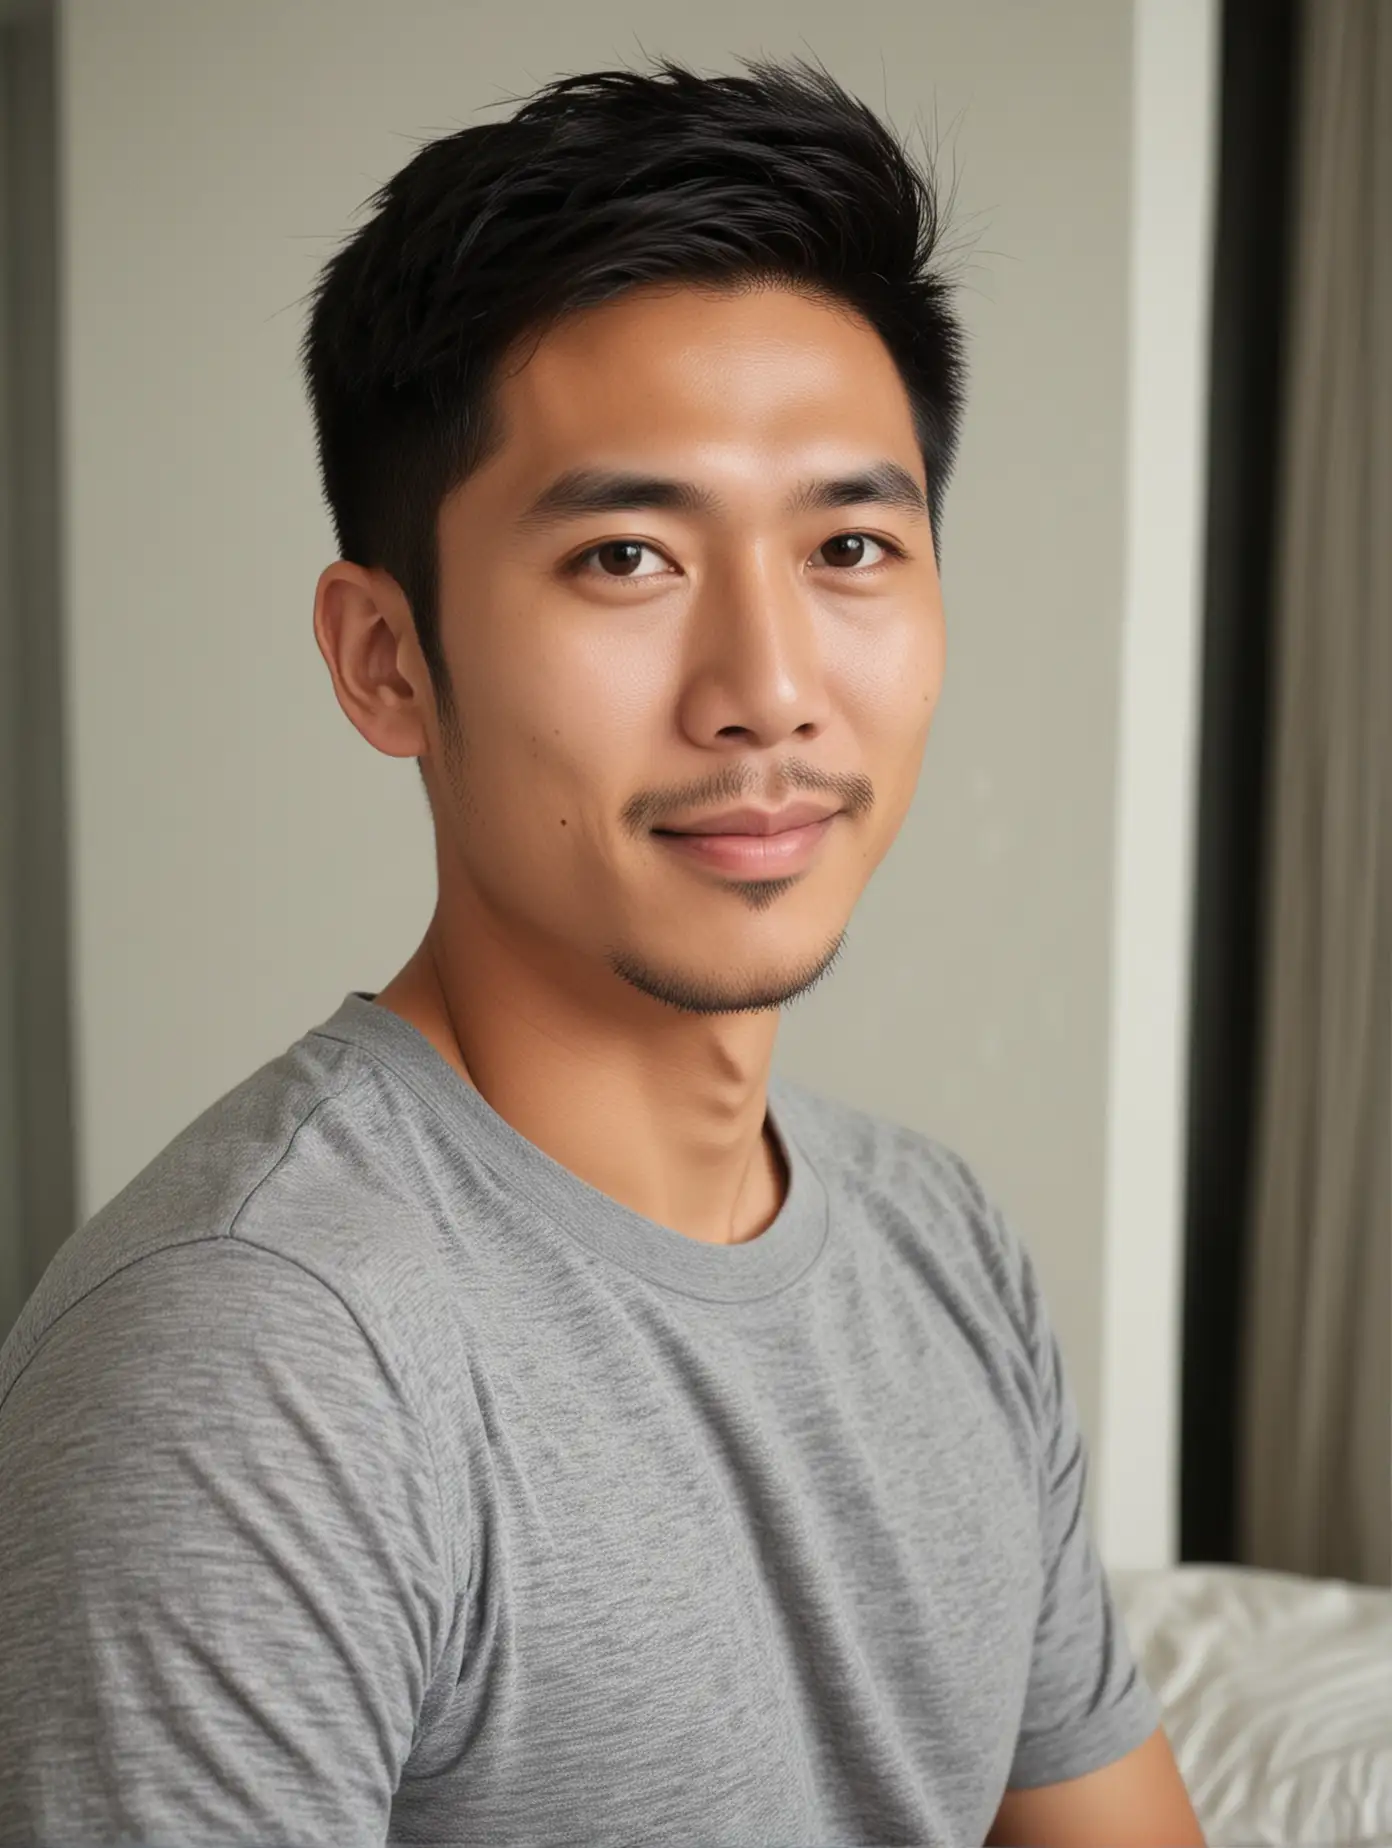 Handsome Singaporean Male Portraits Diverse Lifestyle and Home Scenes